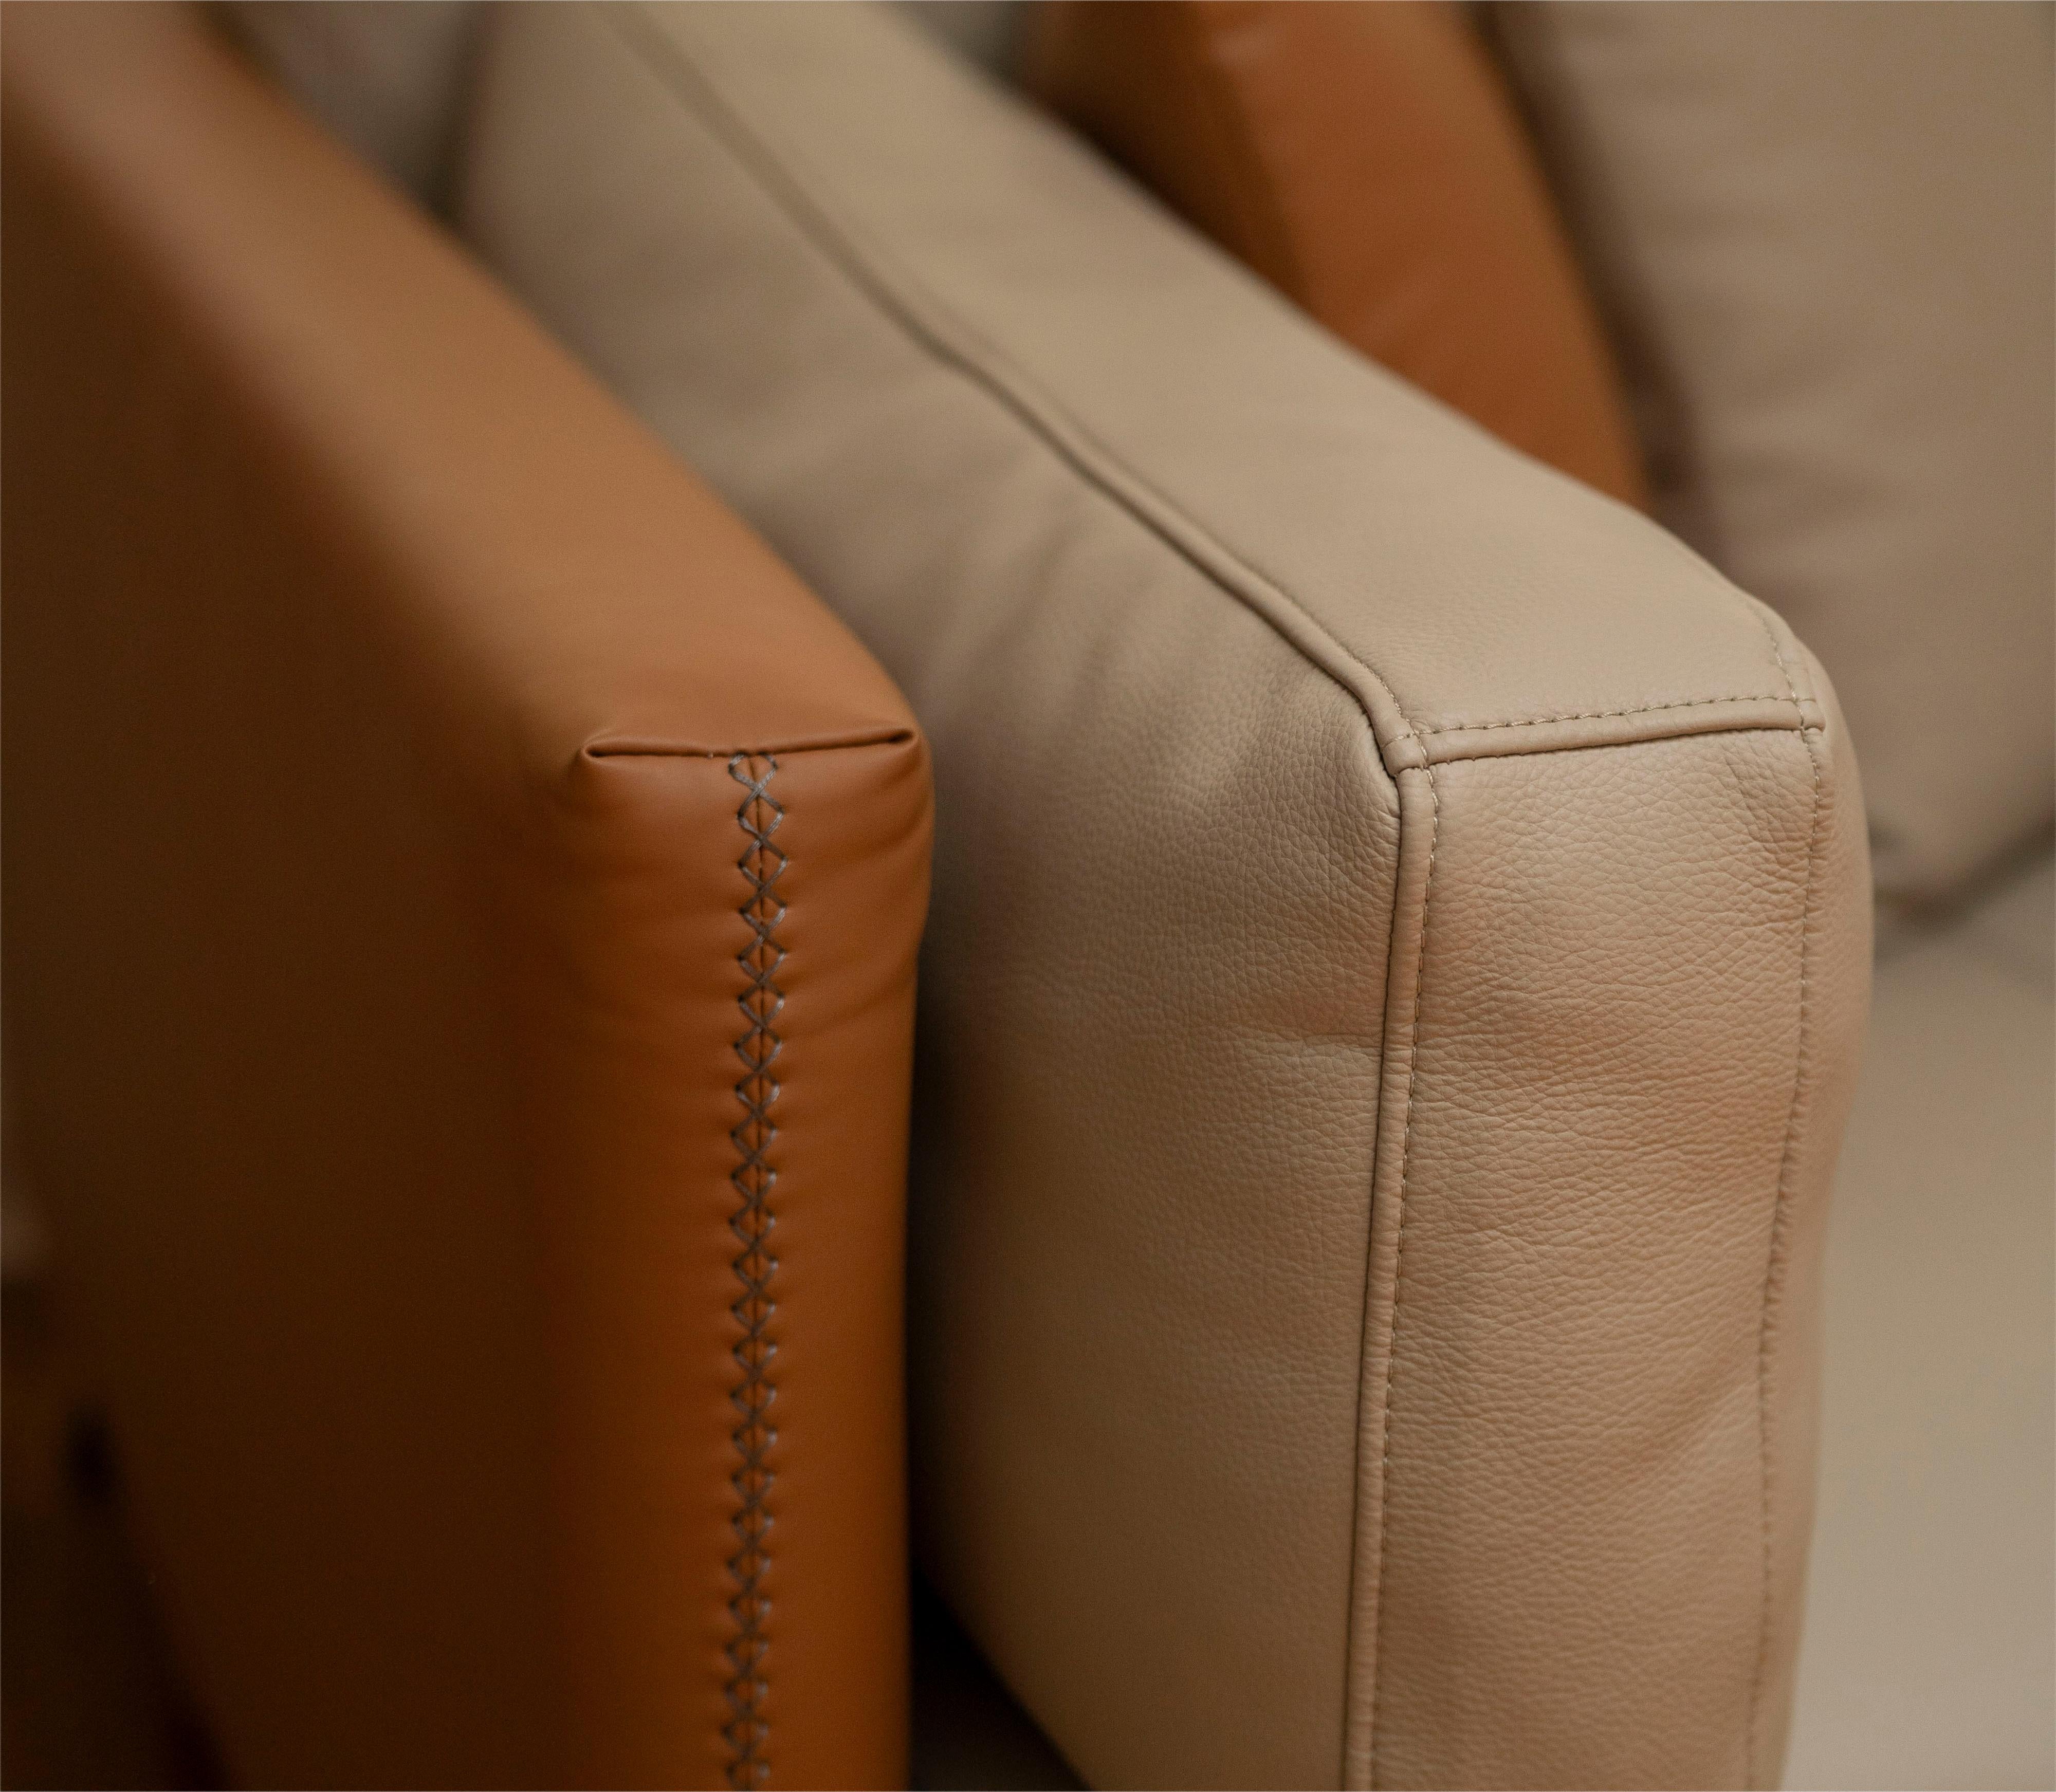 All Leather Sofa that Helps You Kick Back And Relax